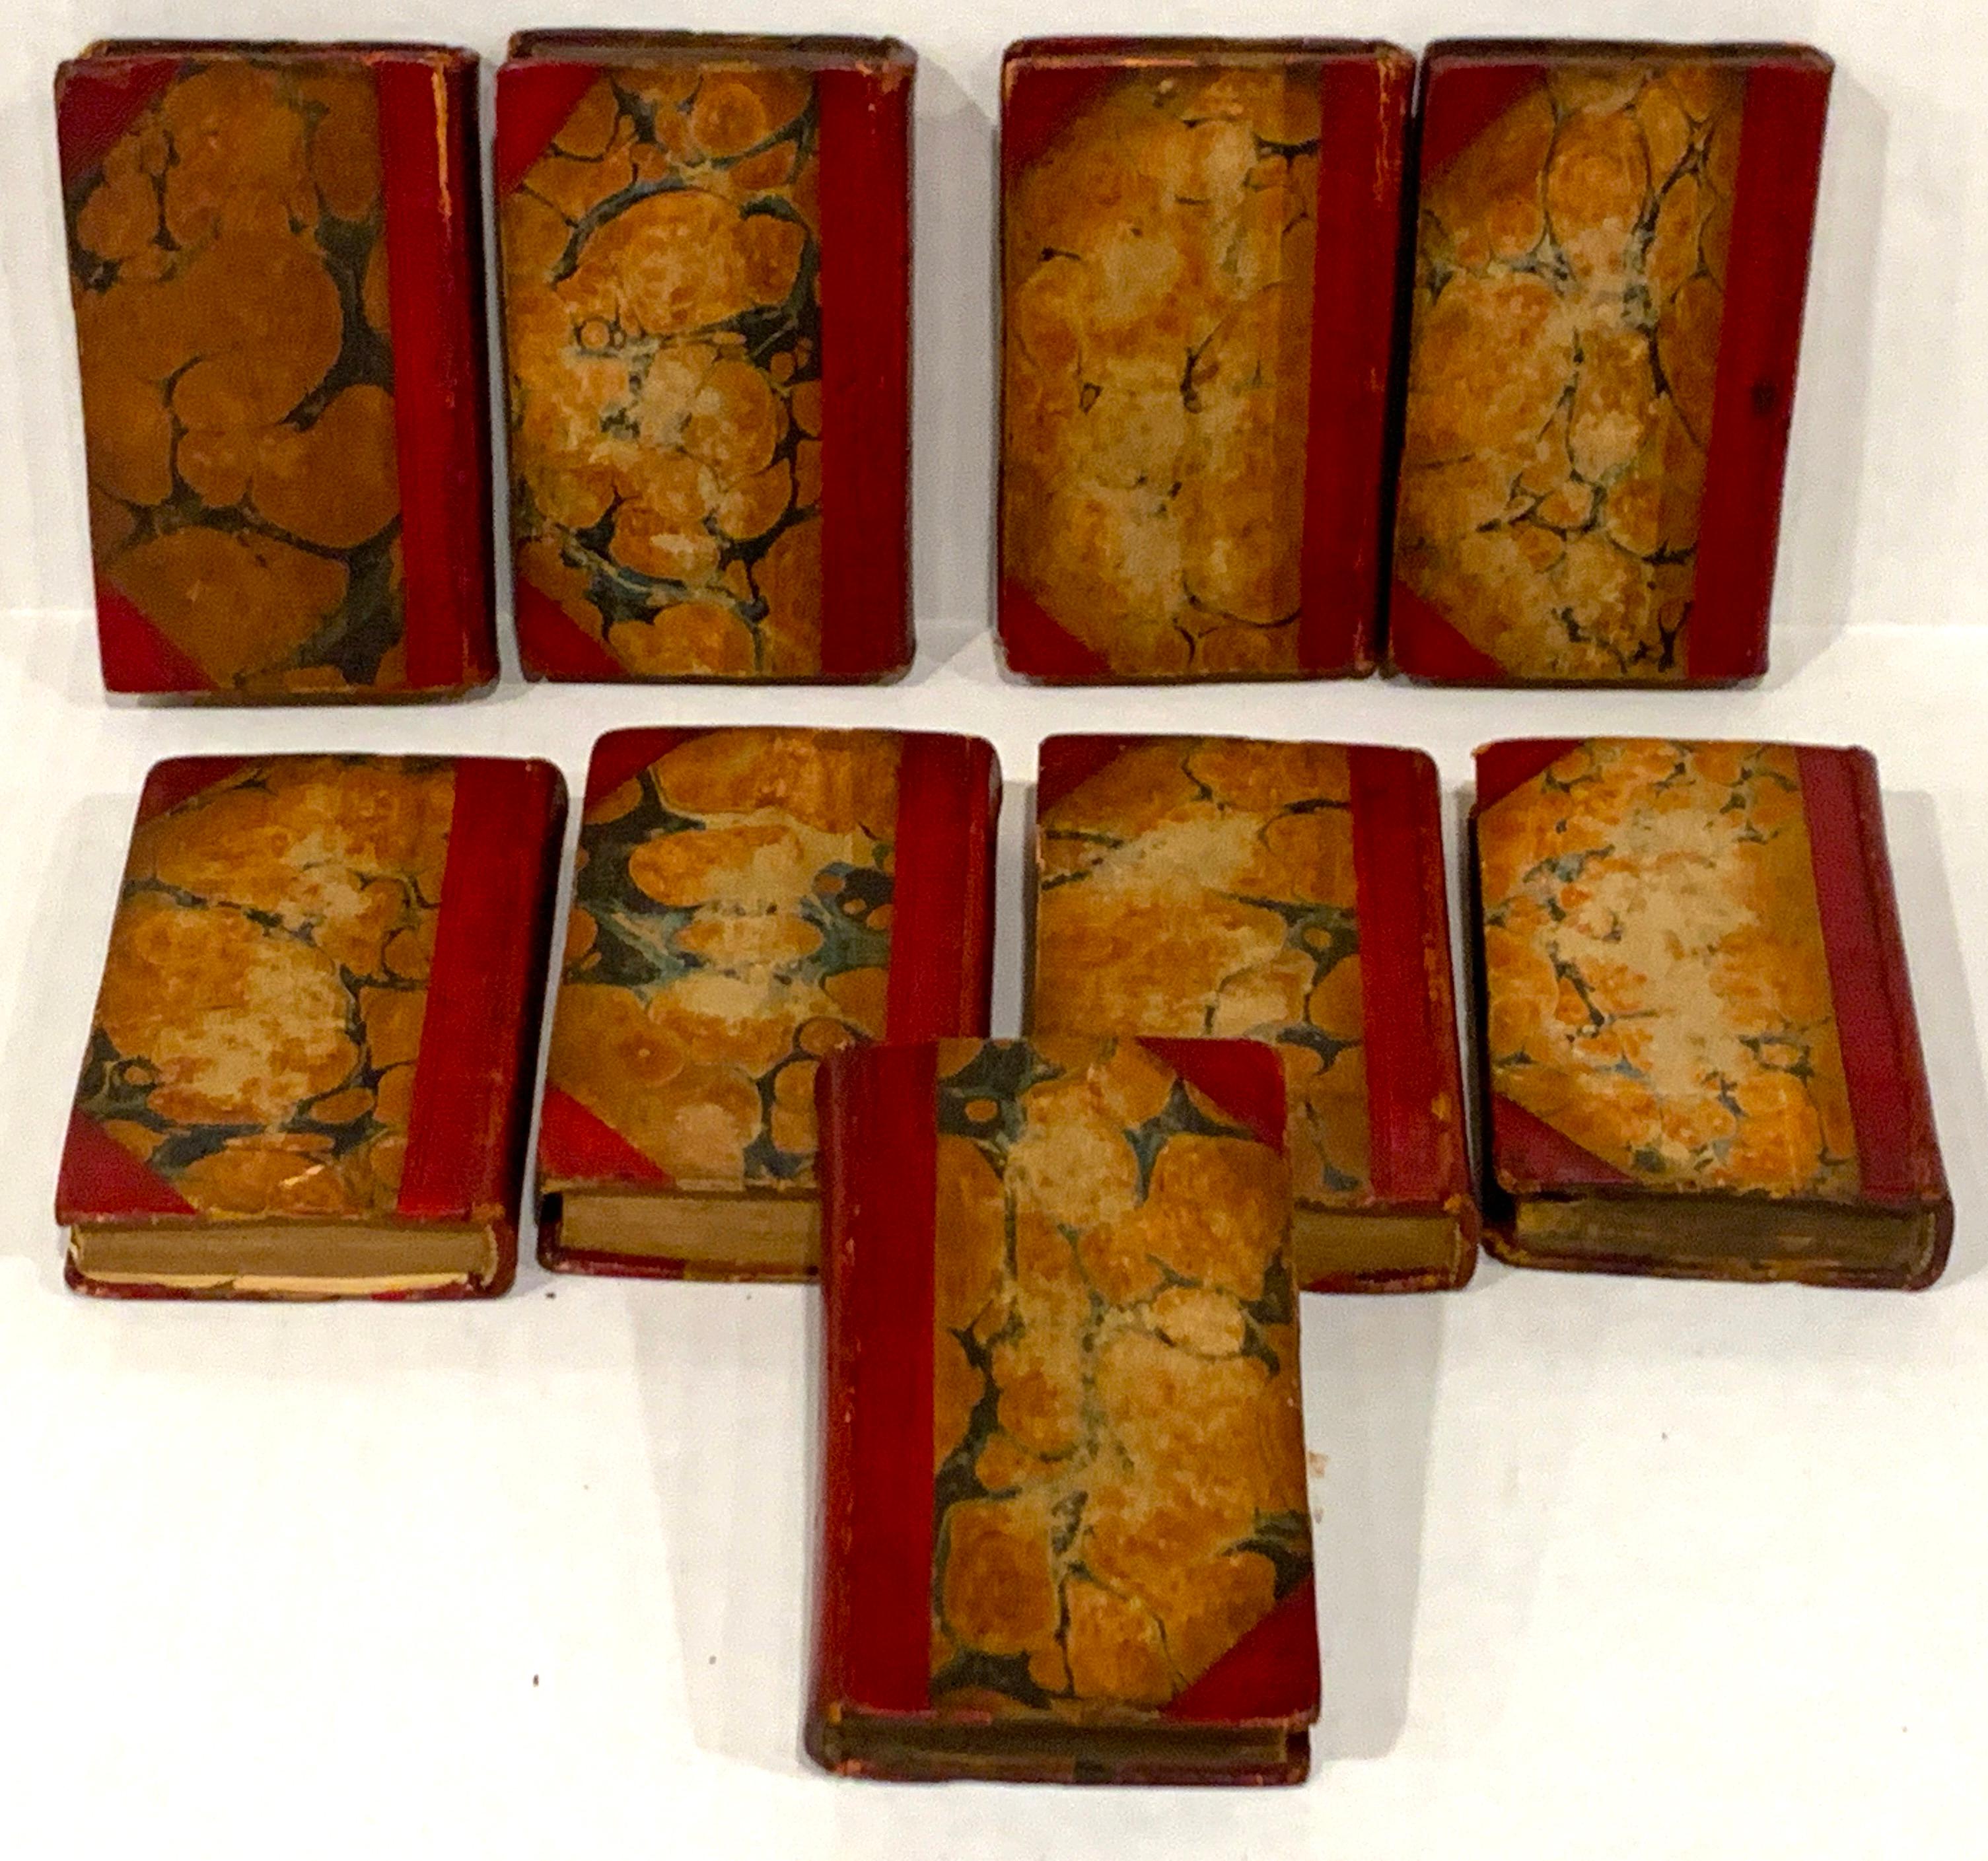 English William Shakespeare's Plays in Miniature 9 Volume Leather Bound Volumes, 1803